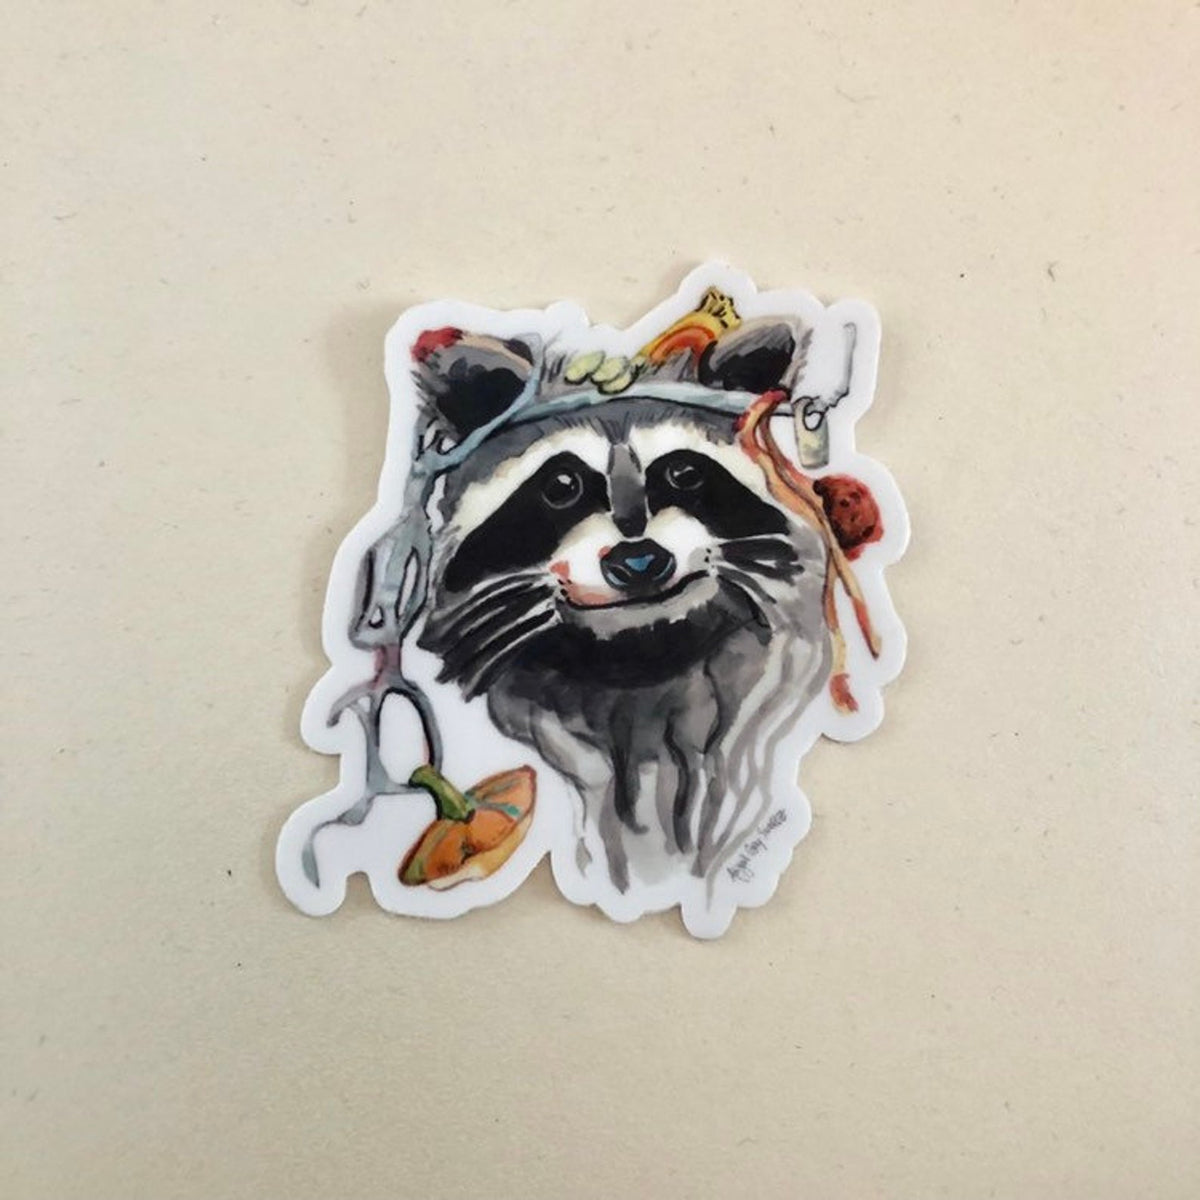 Dumpster Diver sticker of raccoon face by GrayDayStudio